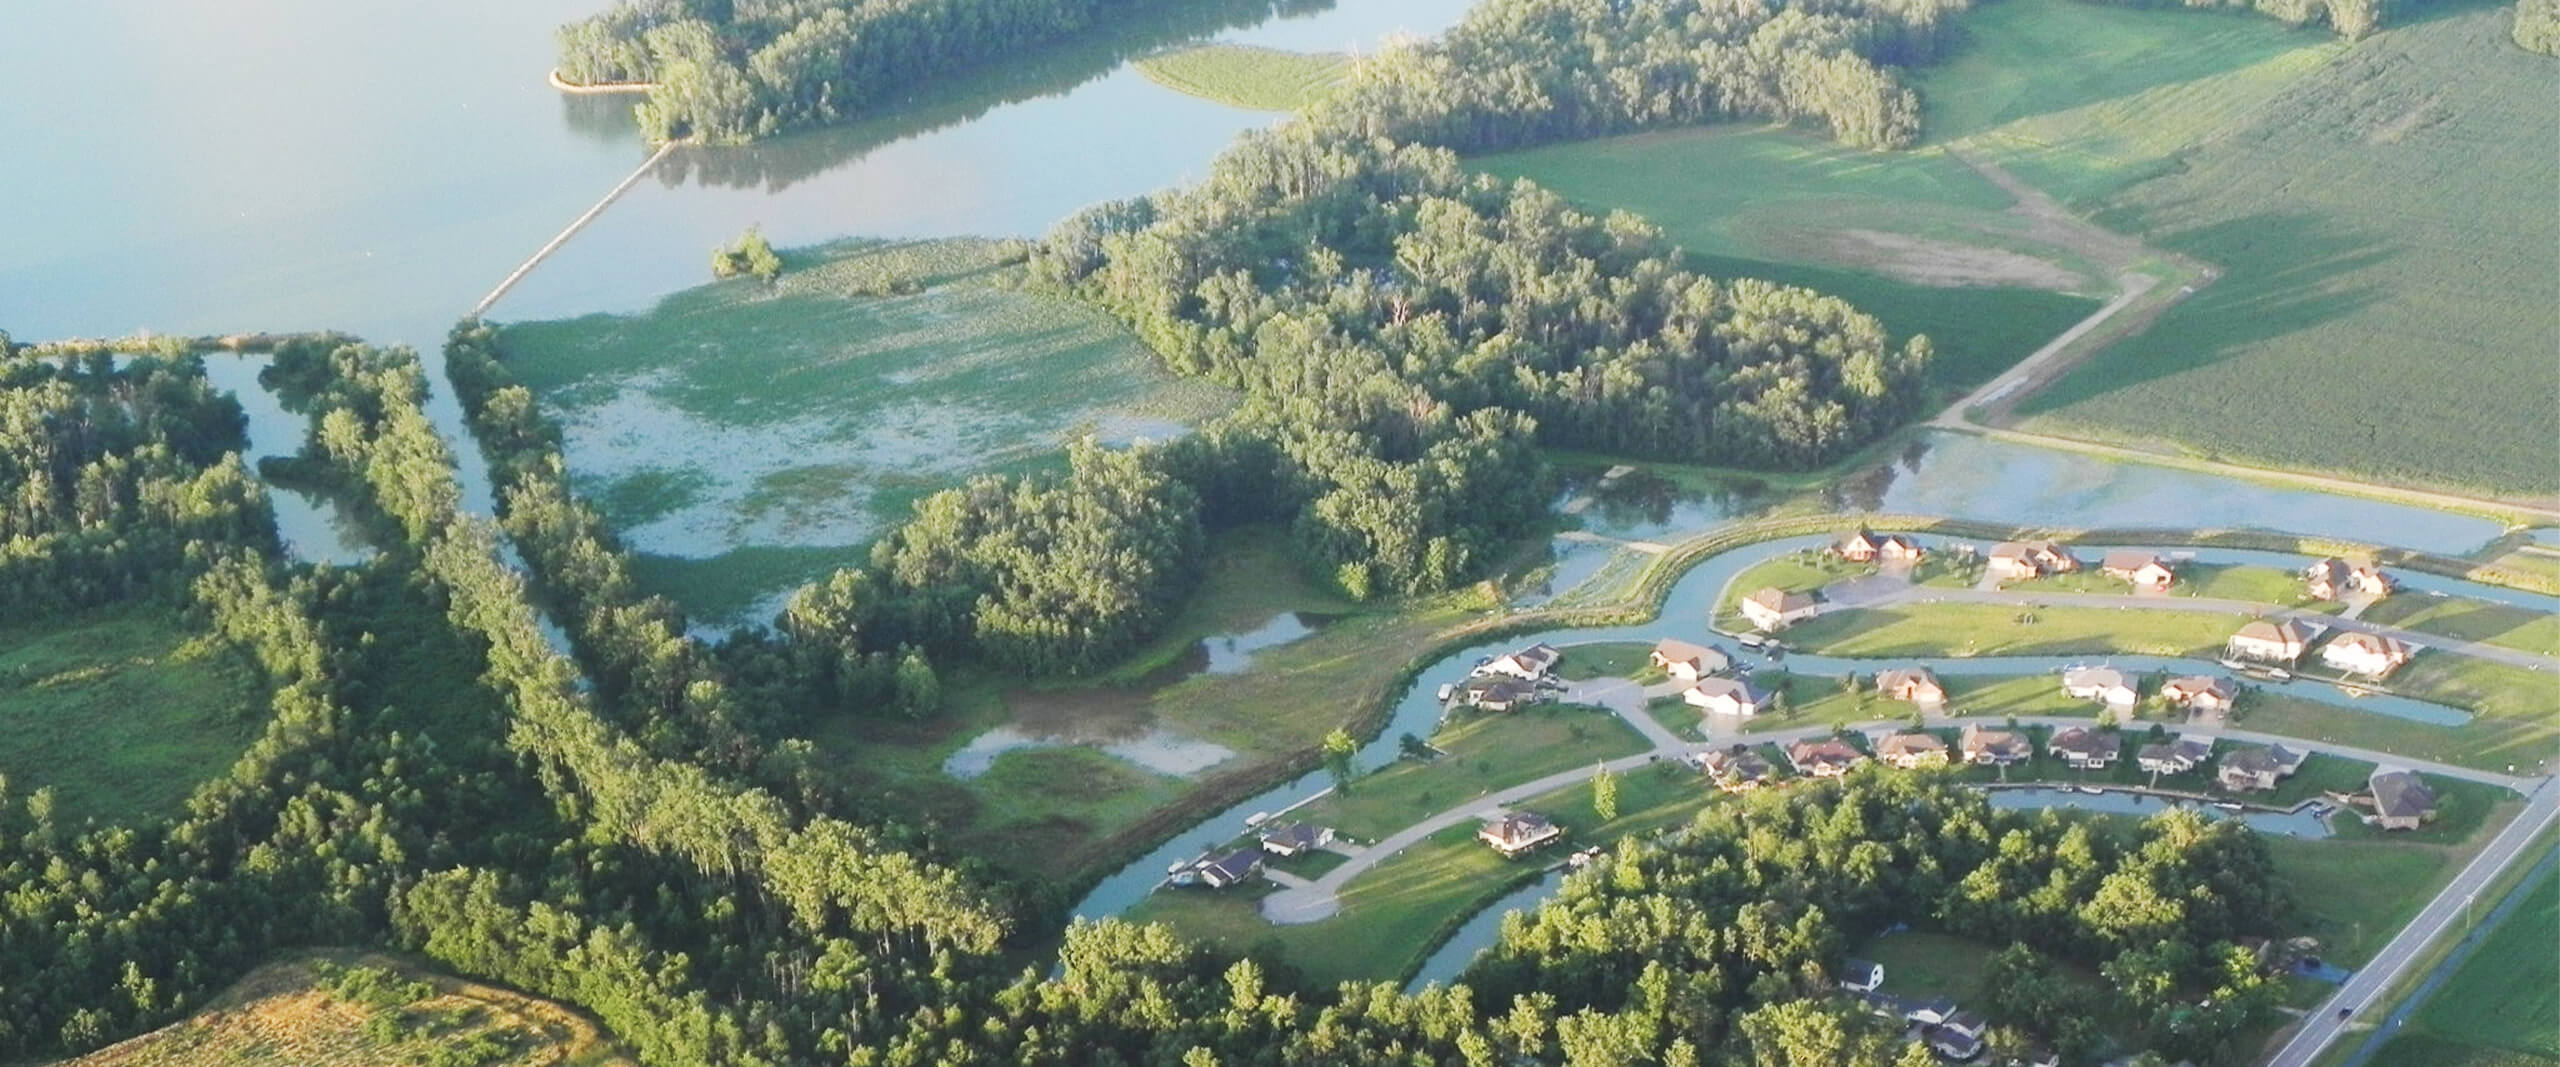 An aerial view of Grand Lake St. Marys